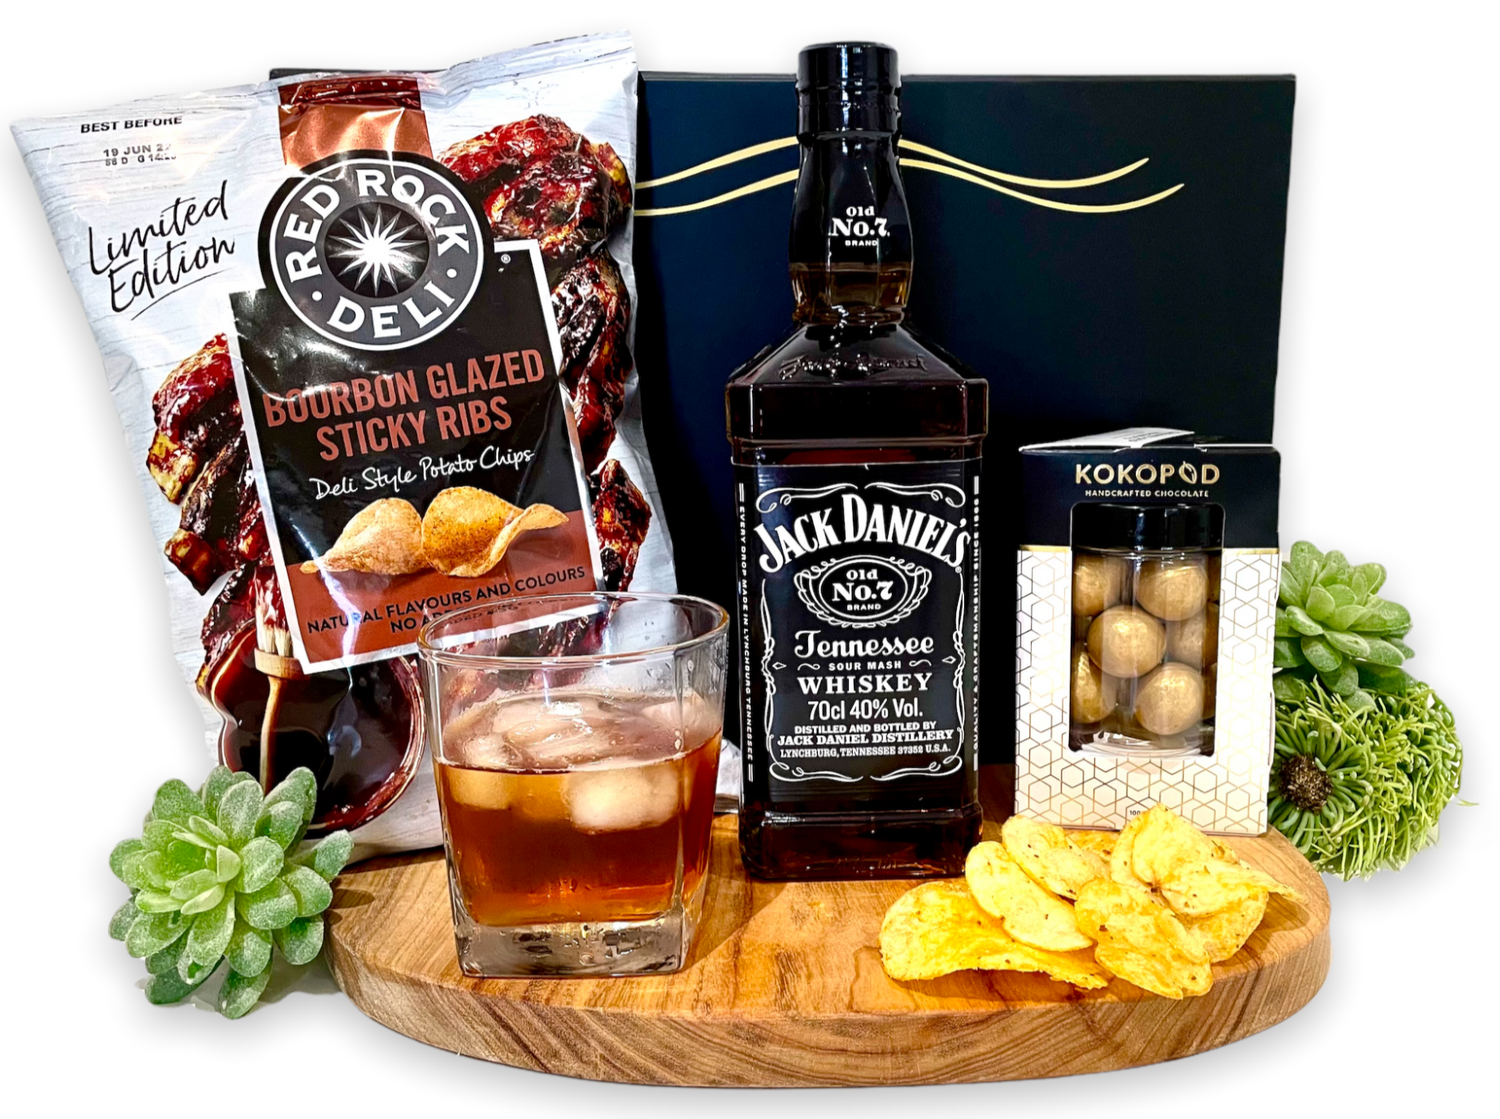 Surprise someone you love with of bottle of their favourite, Jack Daniels Tennessee Whiskey. To enjoy and saviour over rocks or straight. With the added crunch of Red Rock's Limited Edition Bourbon glazed sticky rib Chips for the savoury senses and Caramelised Macadamias for the sweet tooth.